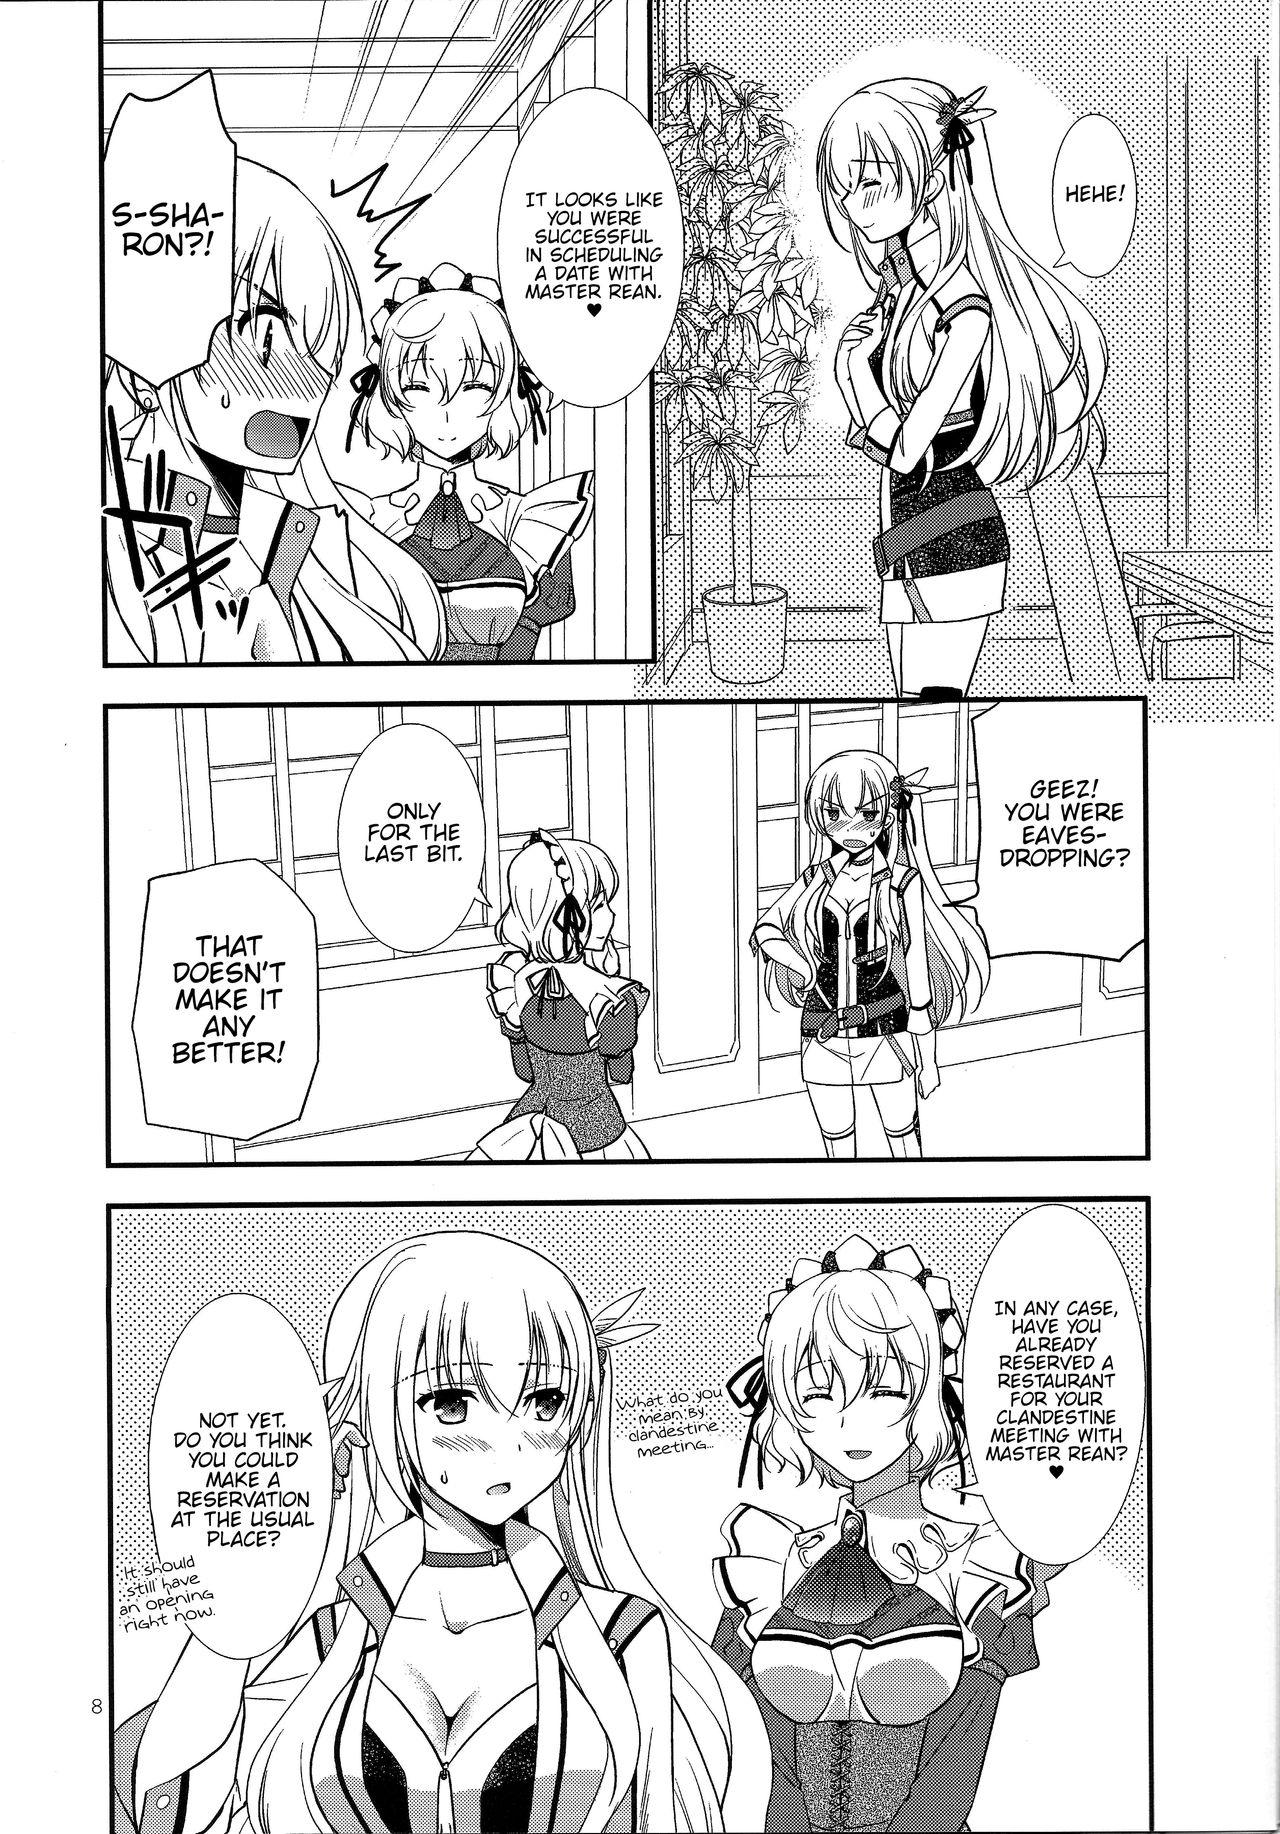 First Houkago Date - The legend of heroes | eiyuu densetsu Masseuse - Page 6